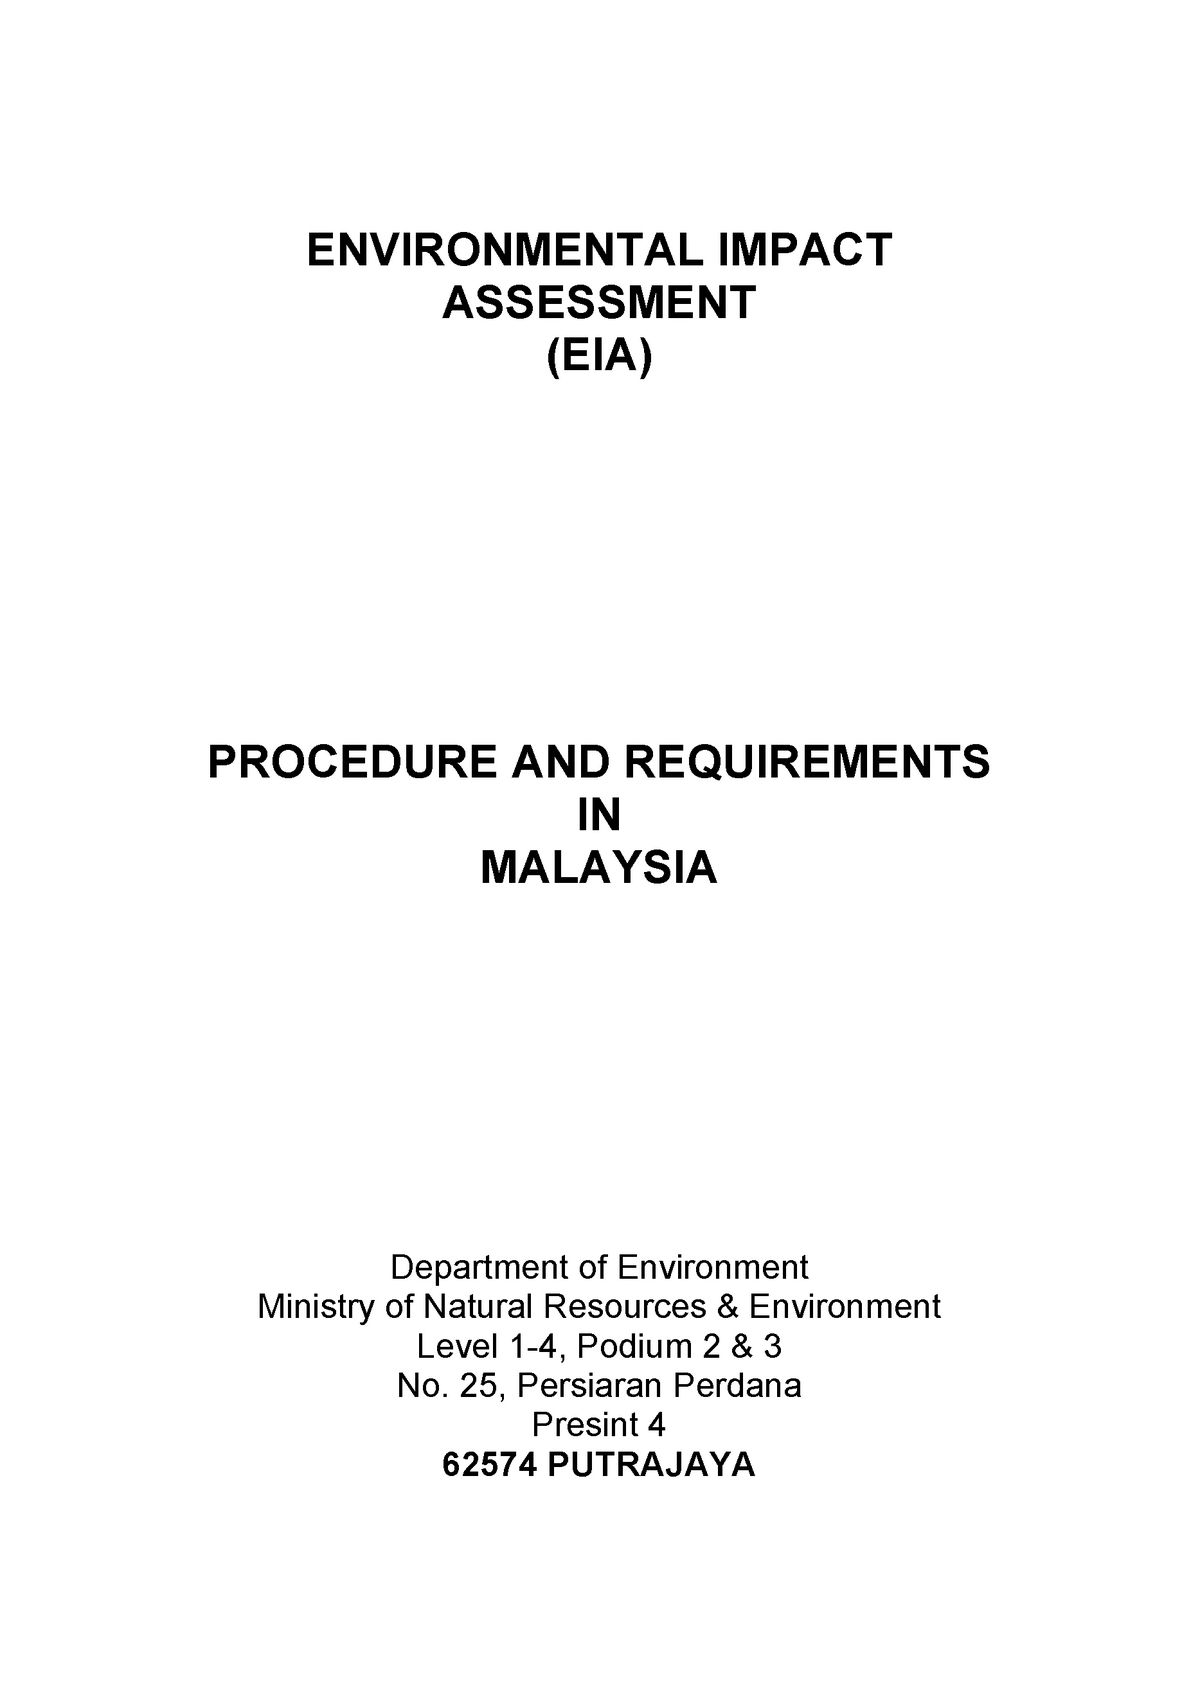 EIA Procedure and Requirements in Malaysia - ENVIRONMENTAL IMPACT ...